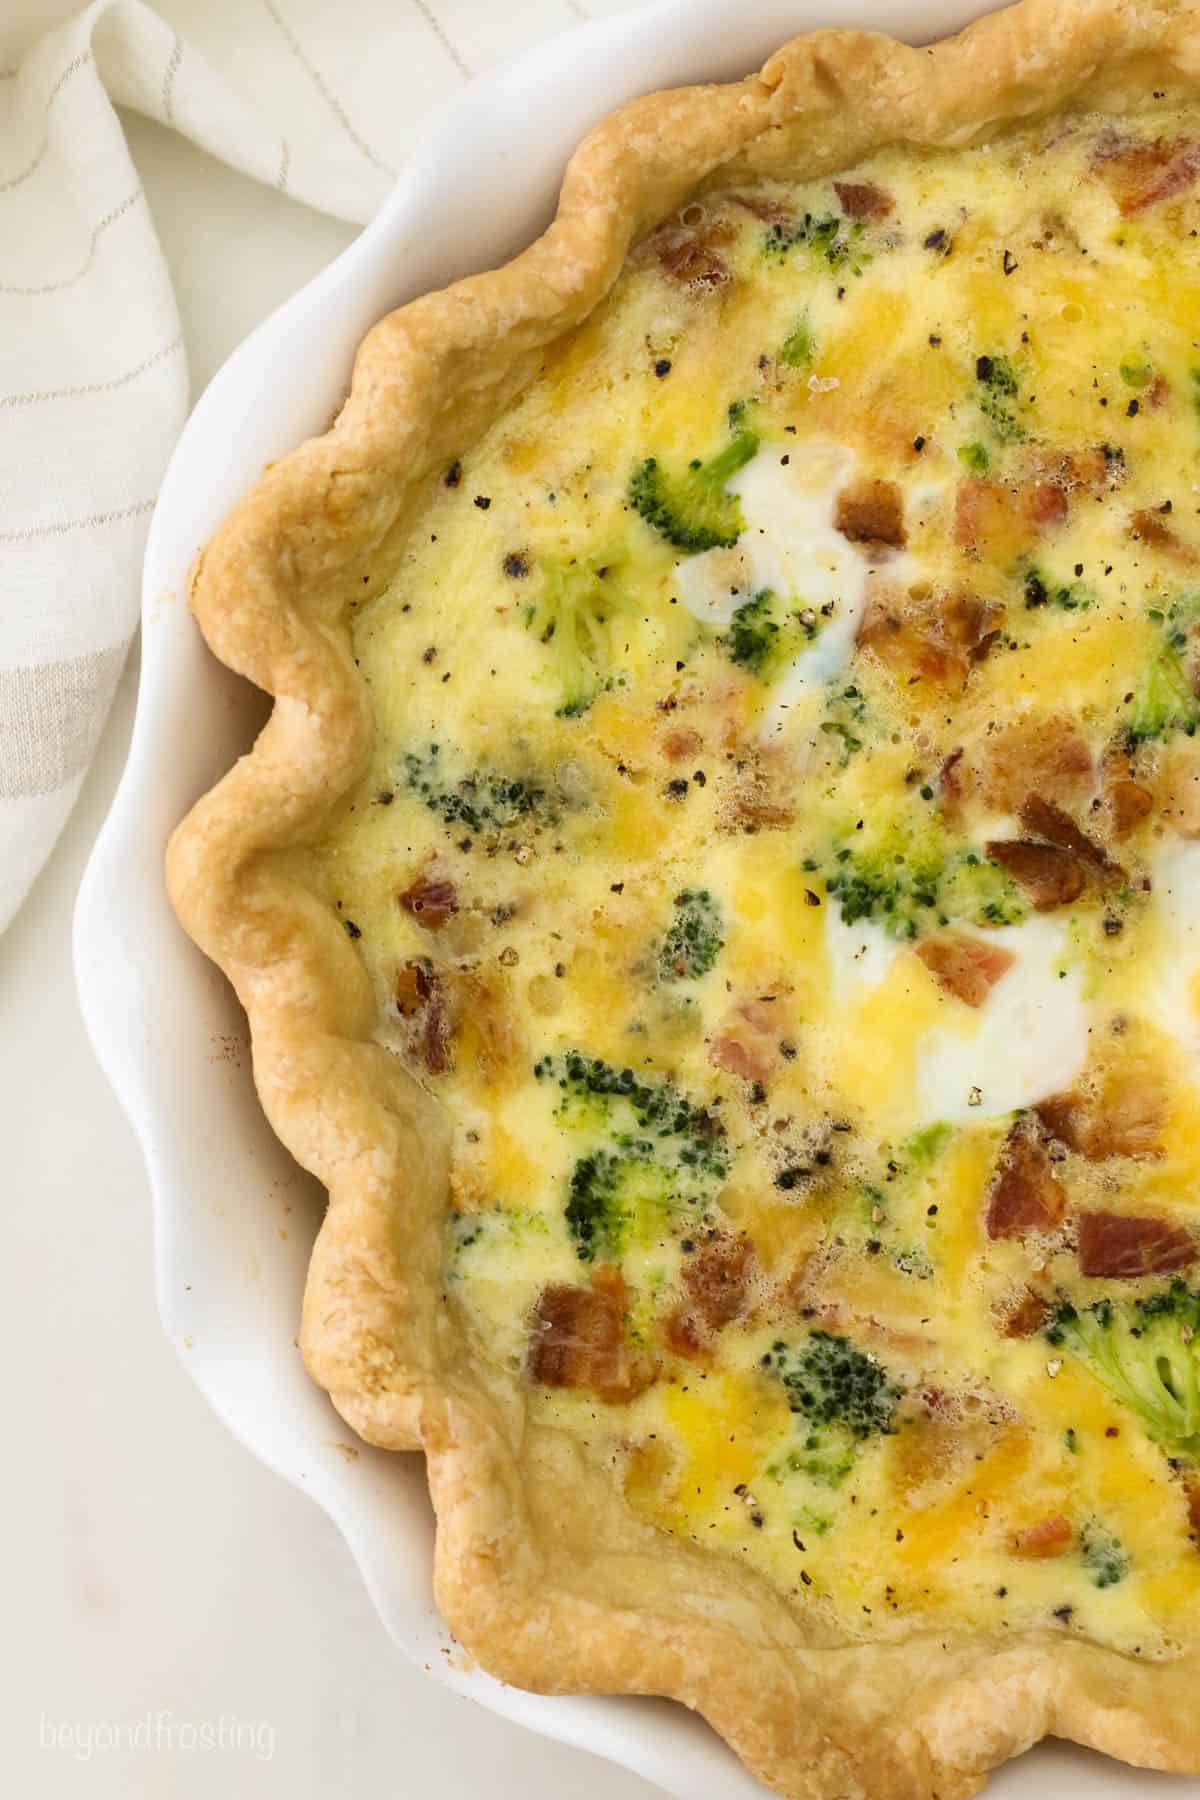 A homemade crusted quiche filled with cheese, meat and veggies in a pie plate